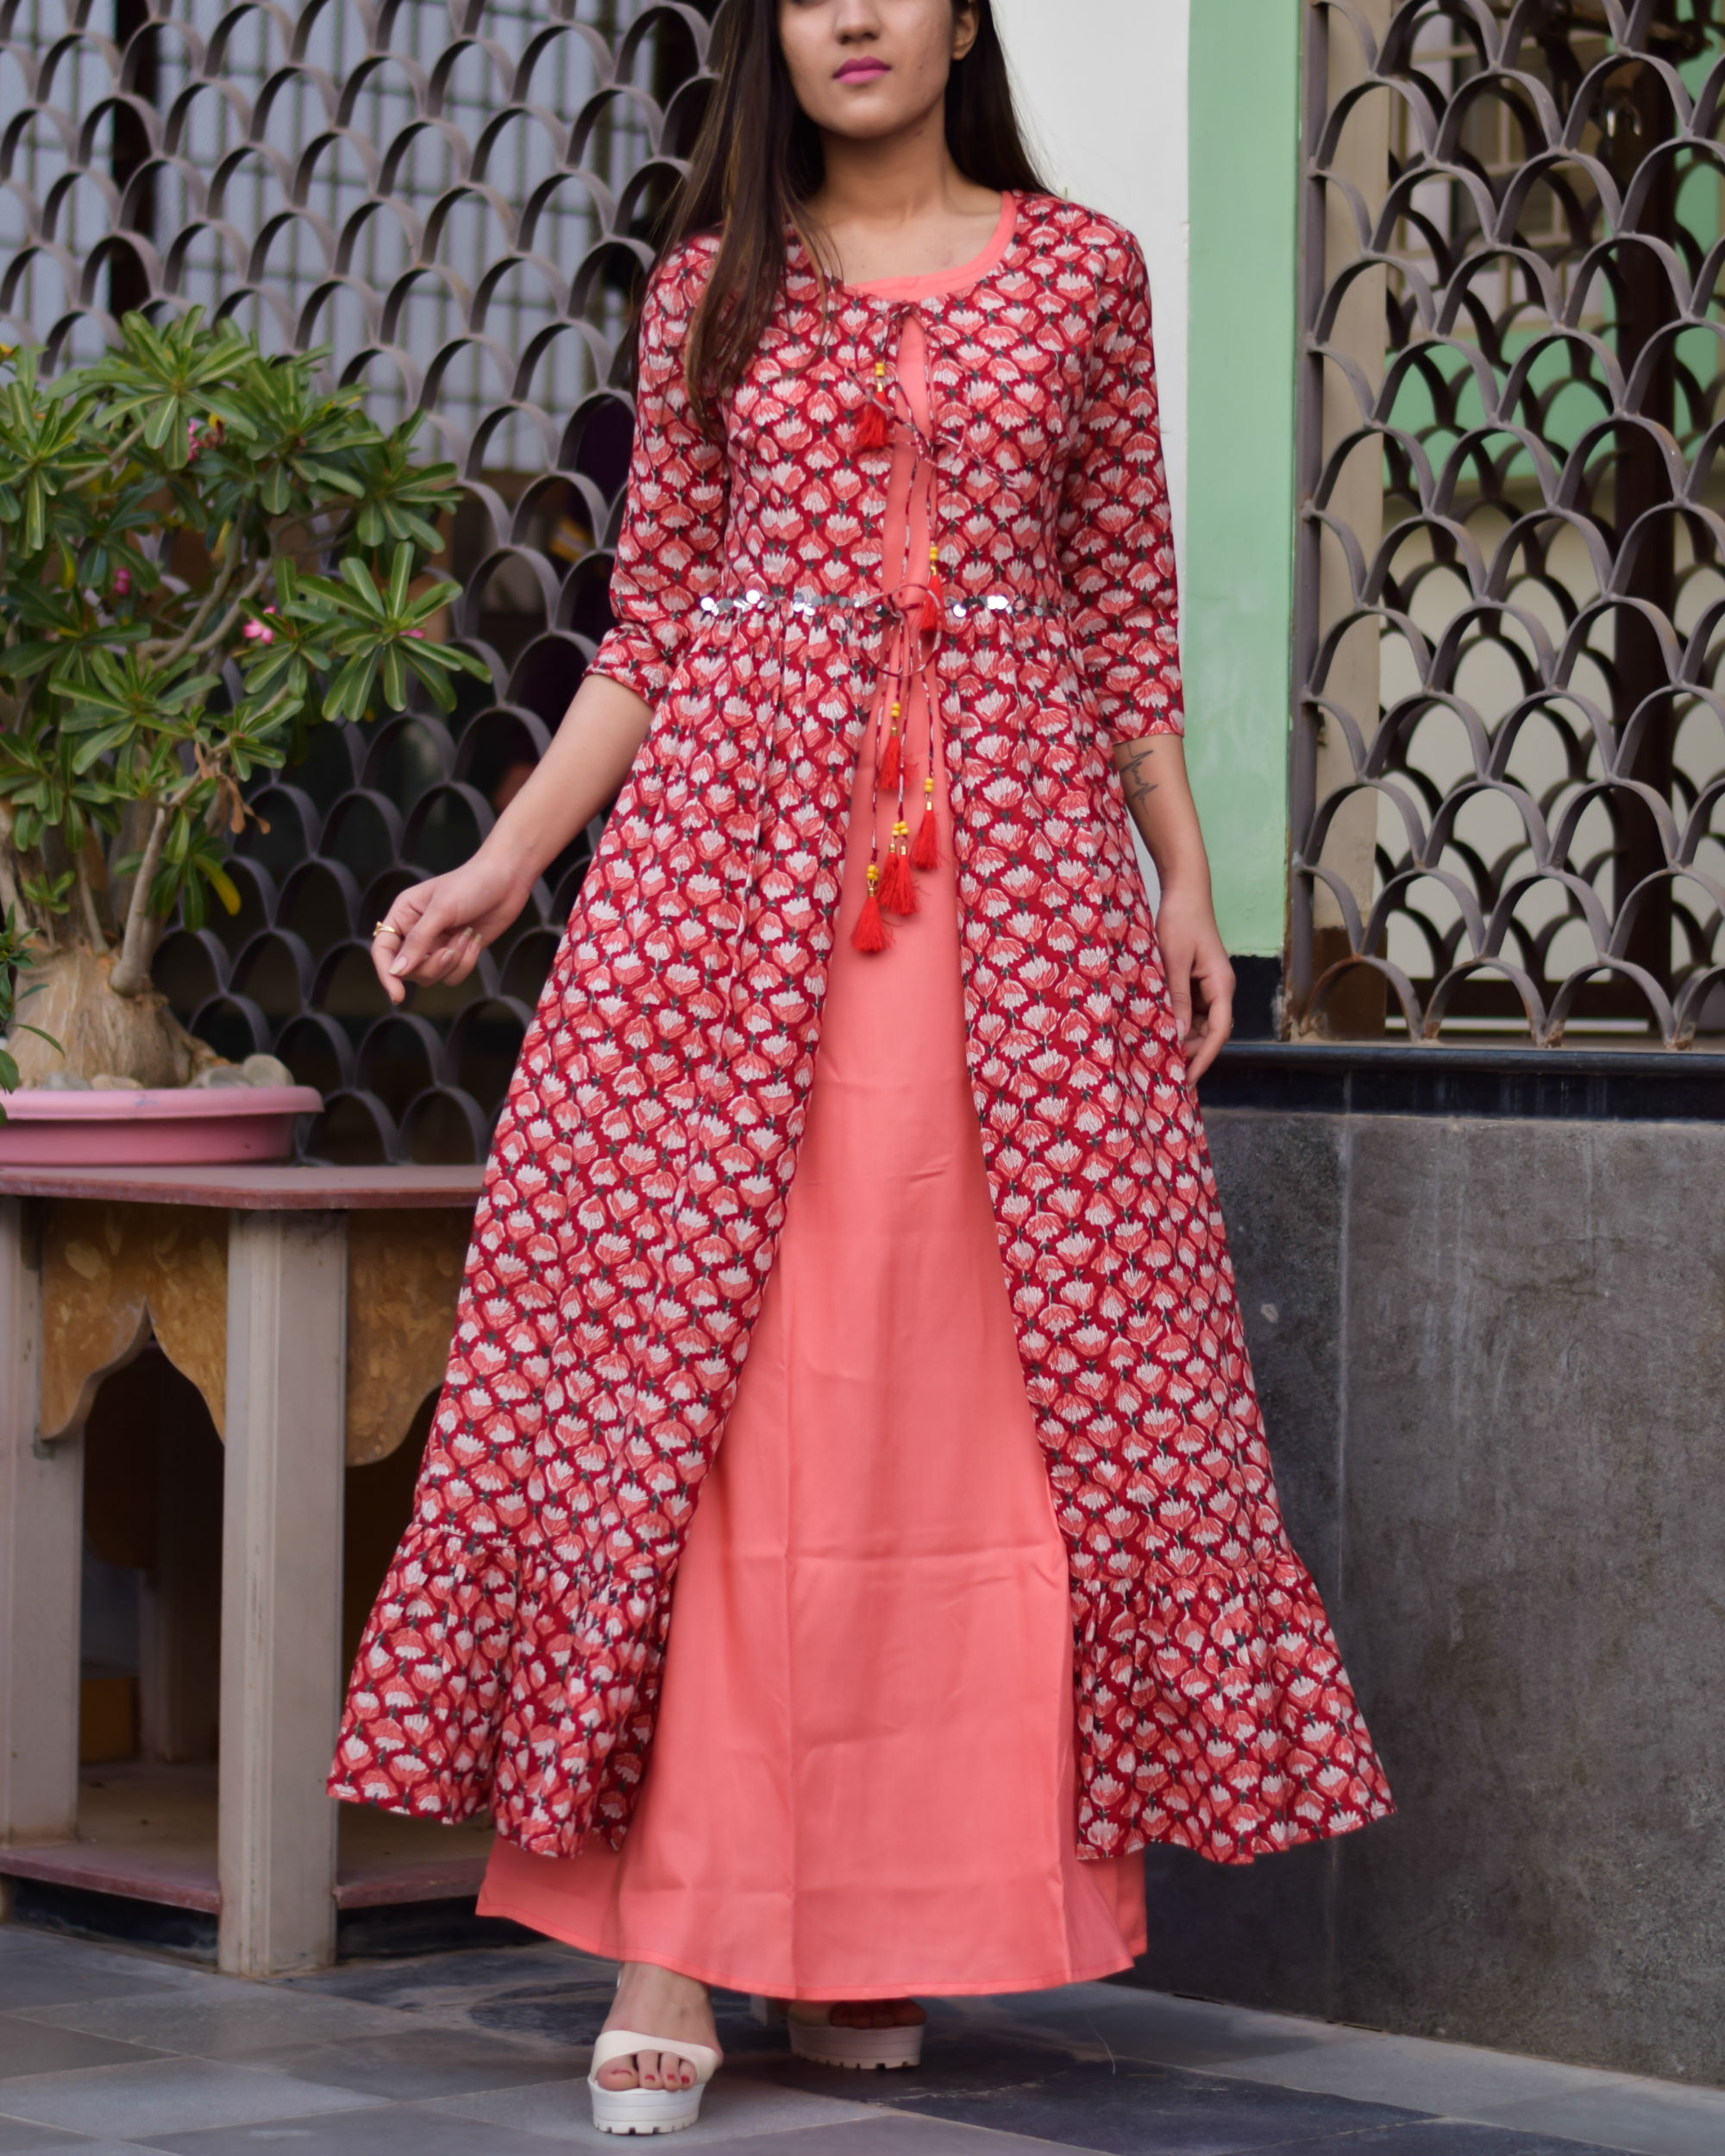 Red and peach double layered dress by Keva